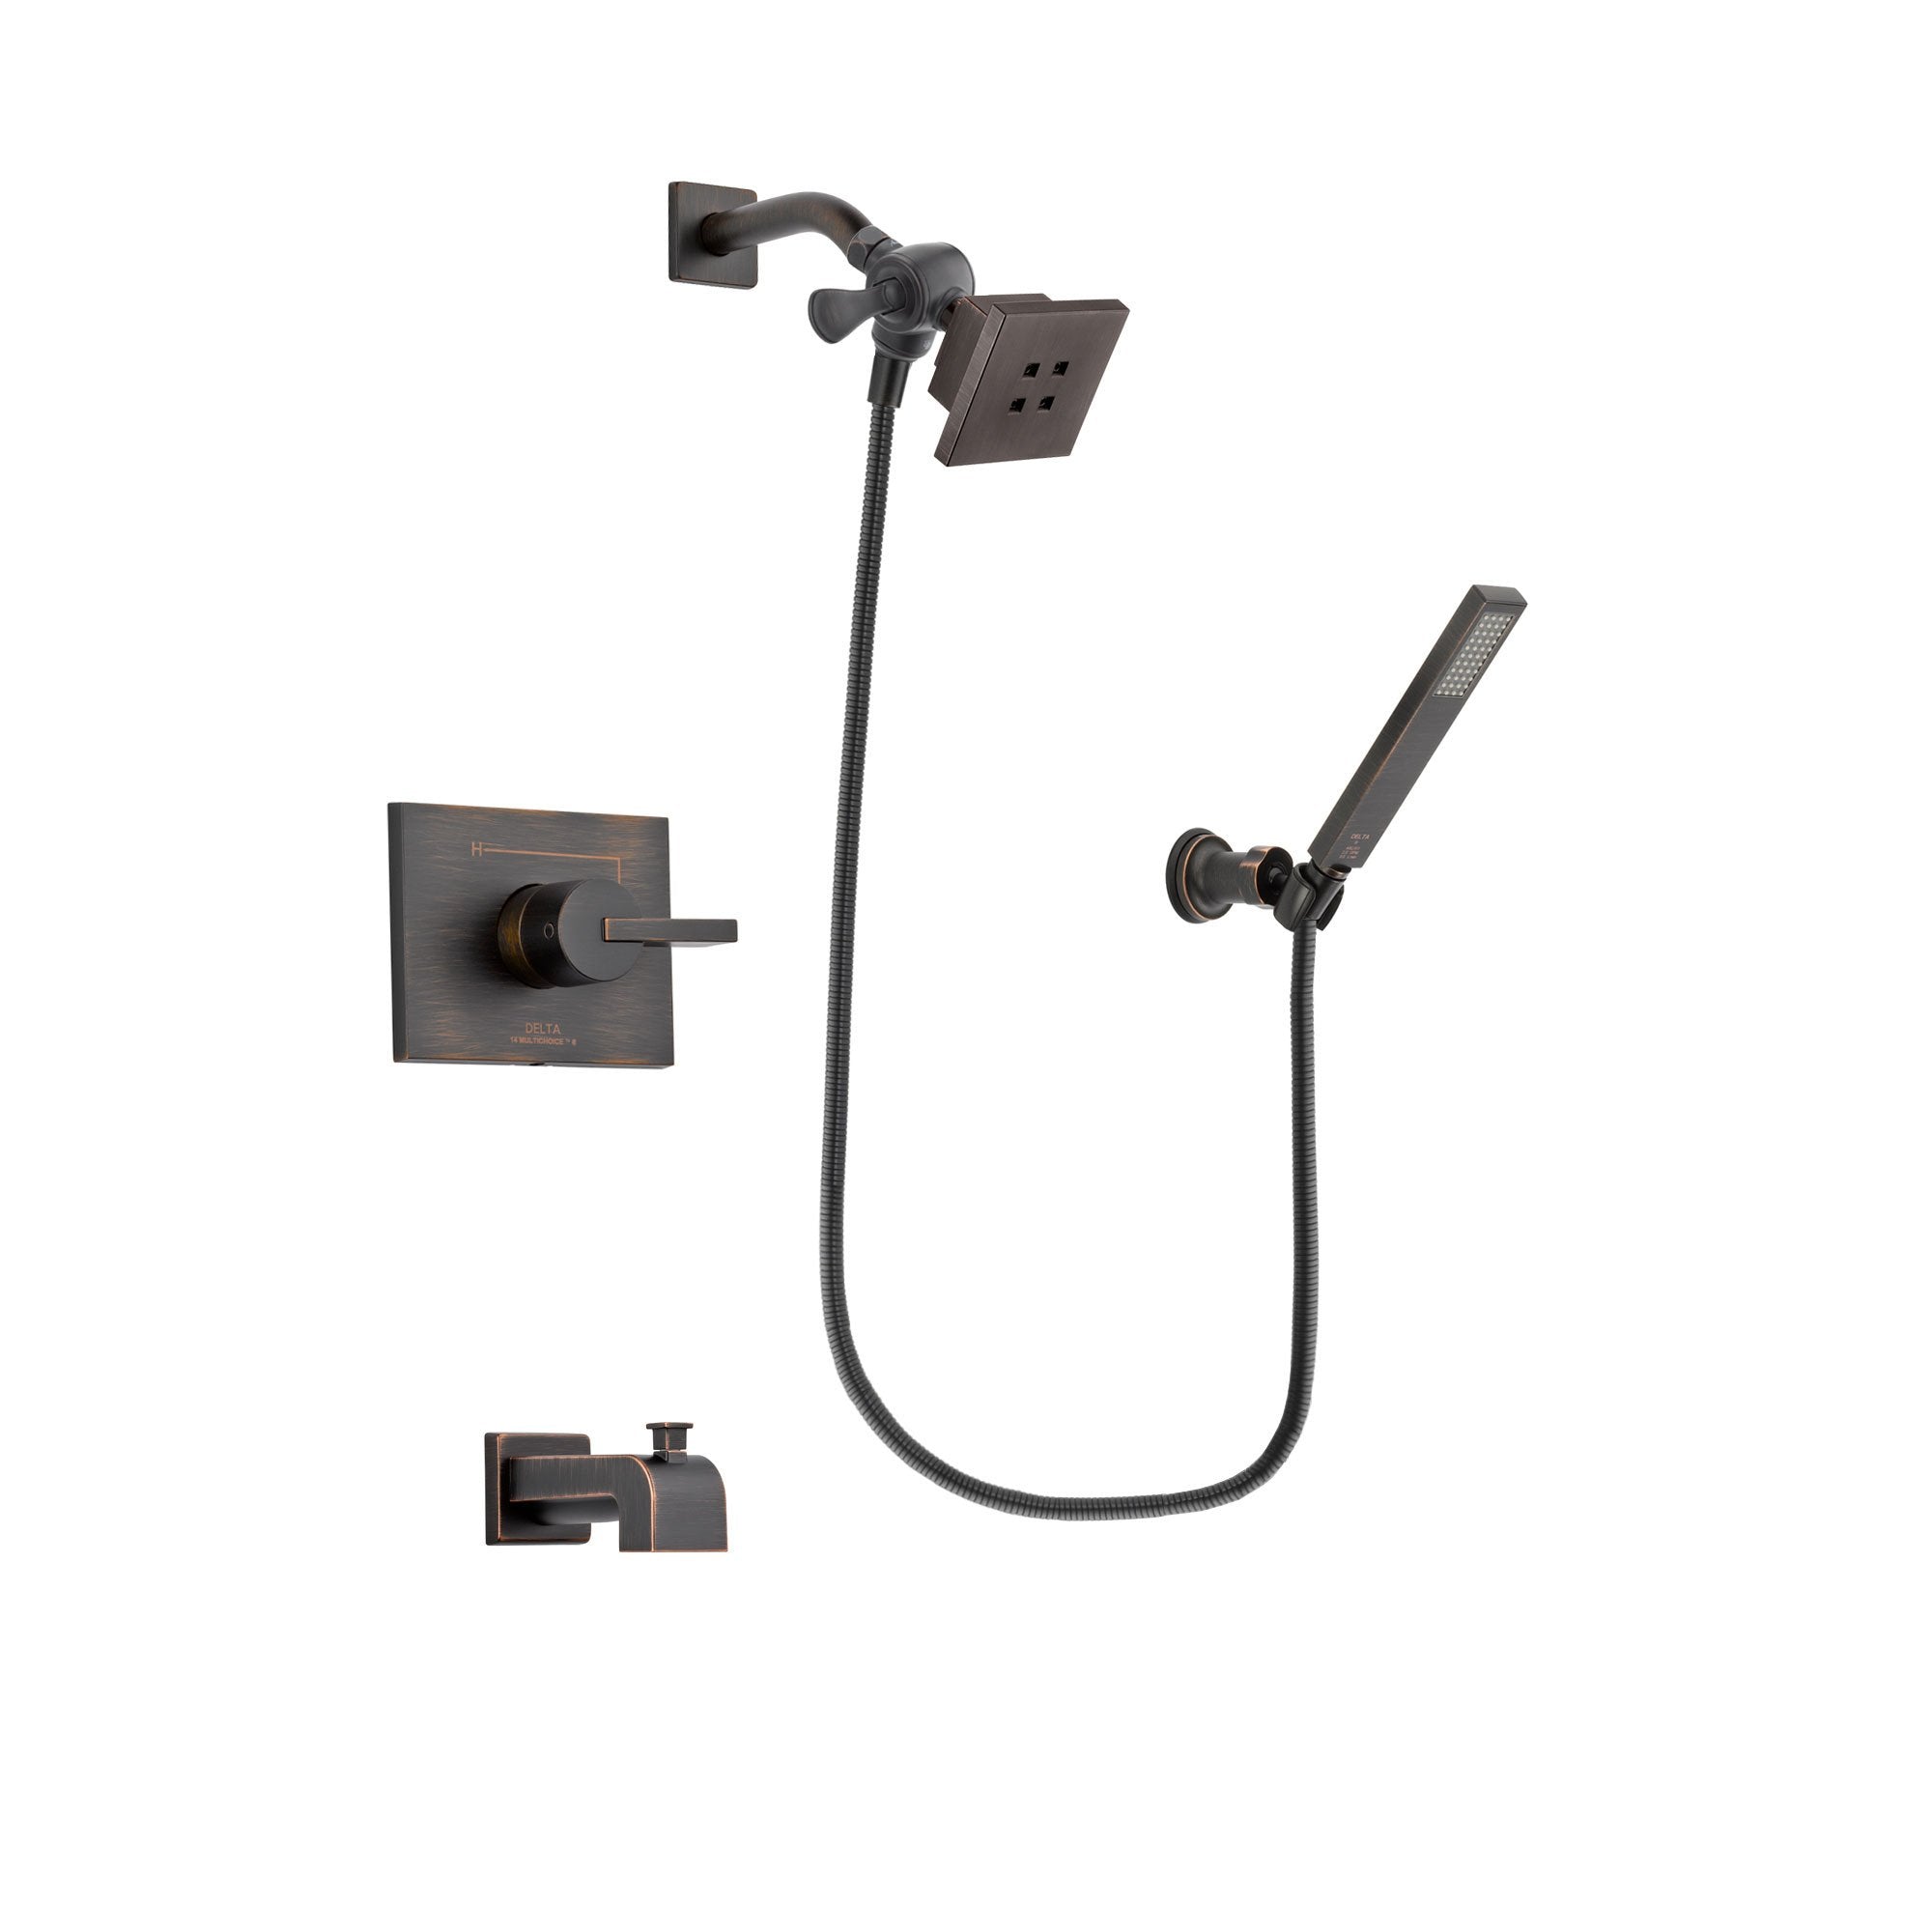 Delta Vero Venetian Bronze Finish Tub and Shower Faucet System Package with Square Showerhead and Modern Wall-Mount Handheld Shower Stick Includes Rough-in Valve and Tub Spout DSP3251V